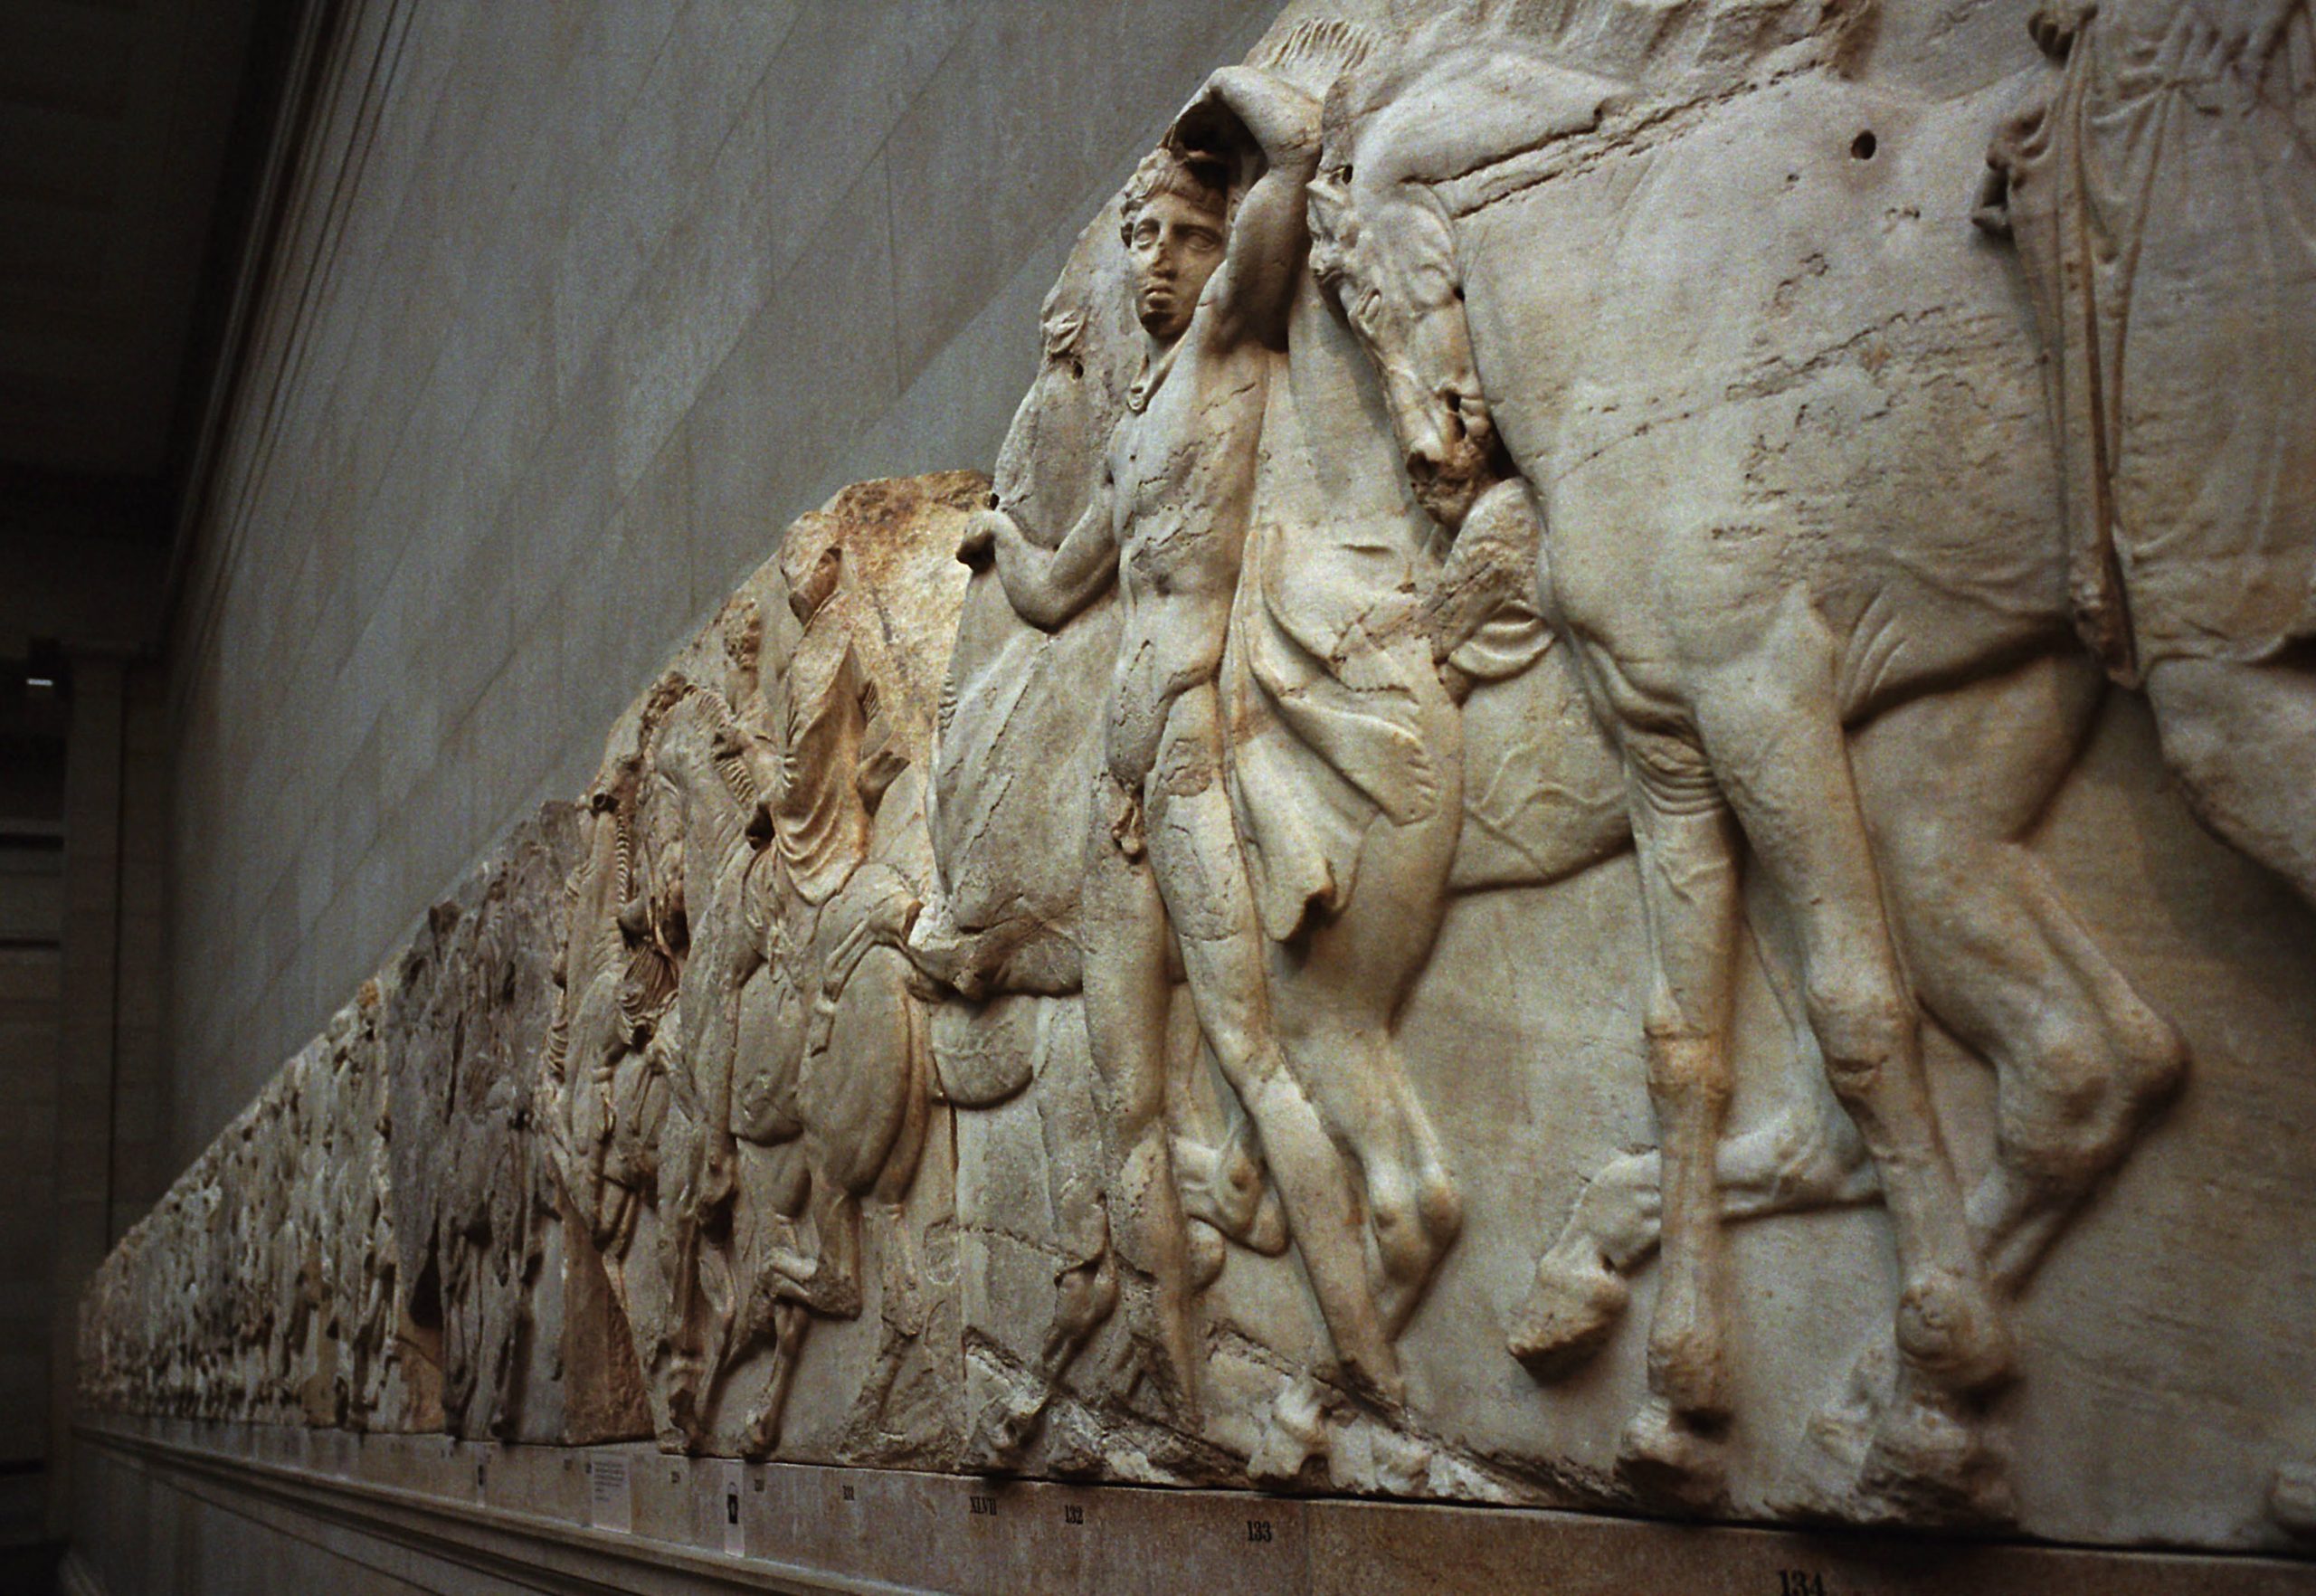 Part of the Elgin Marbles